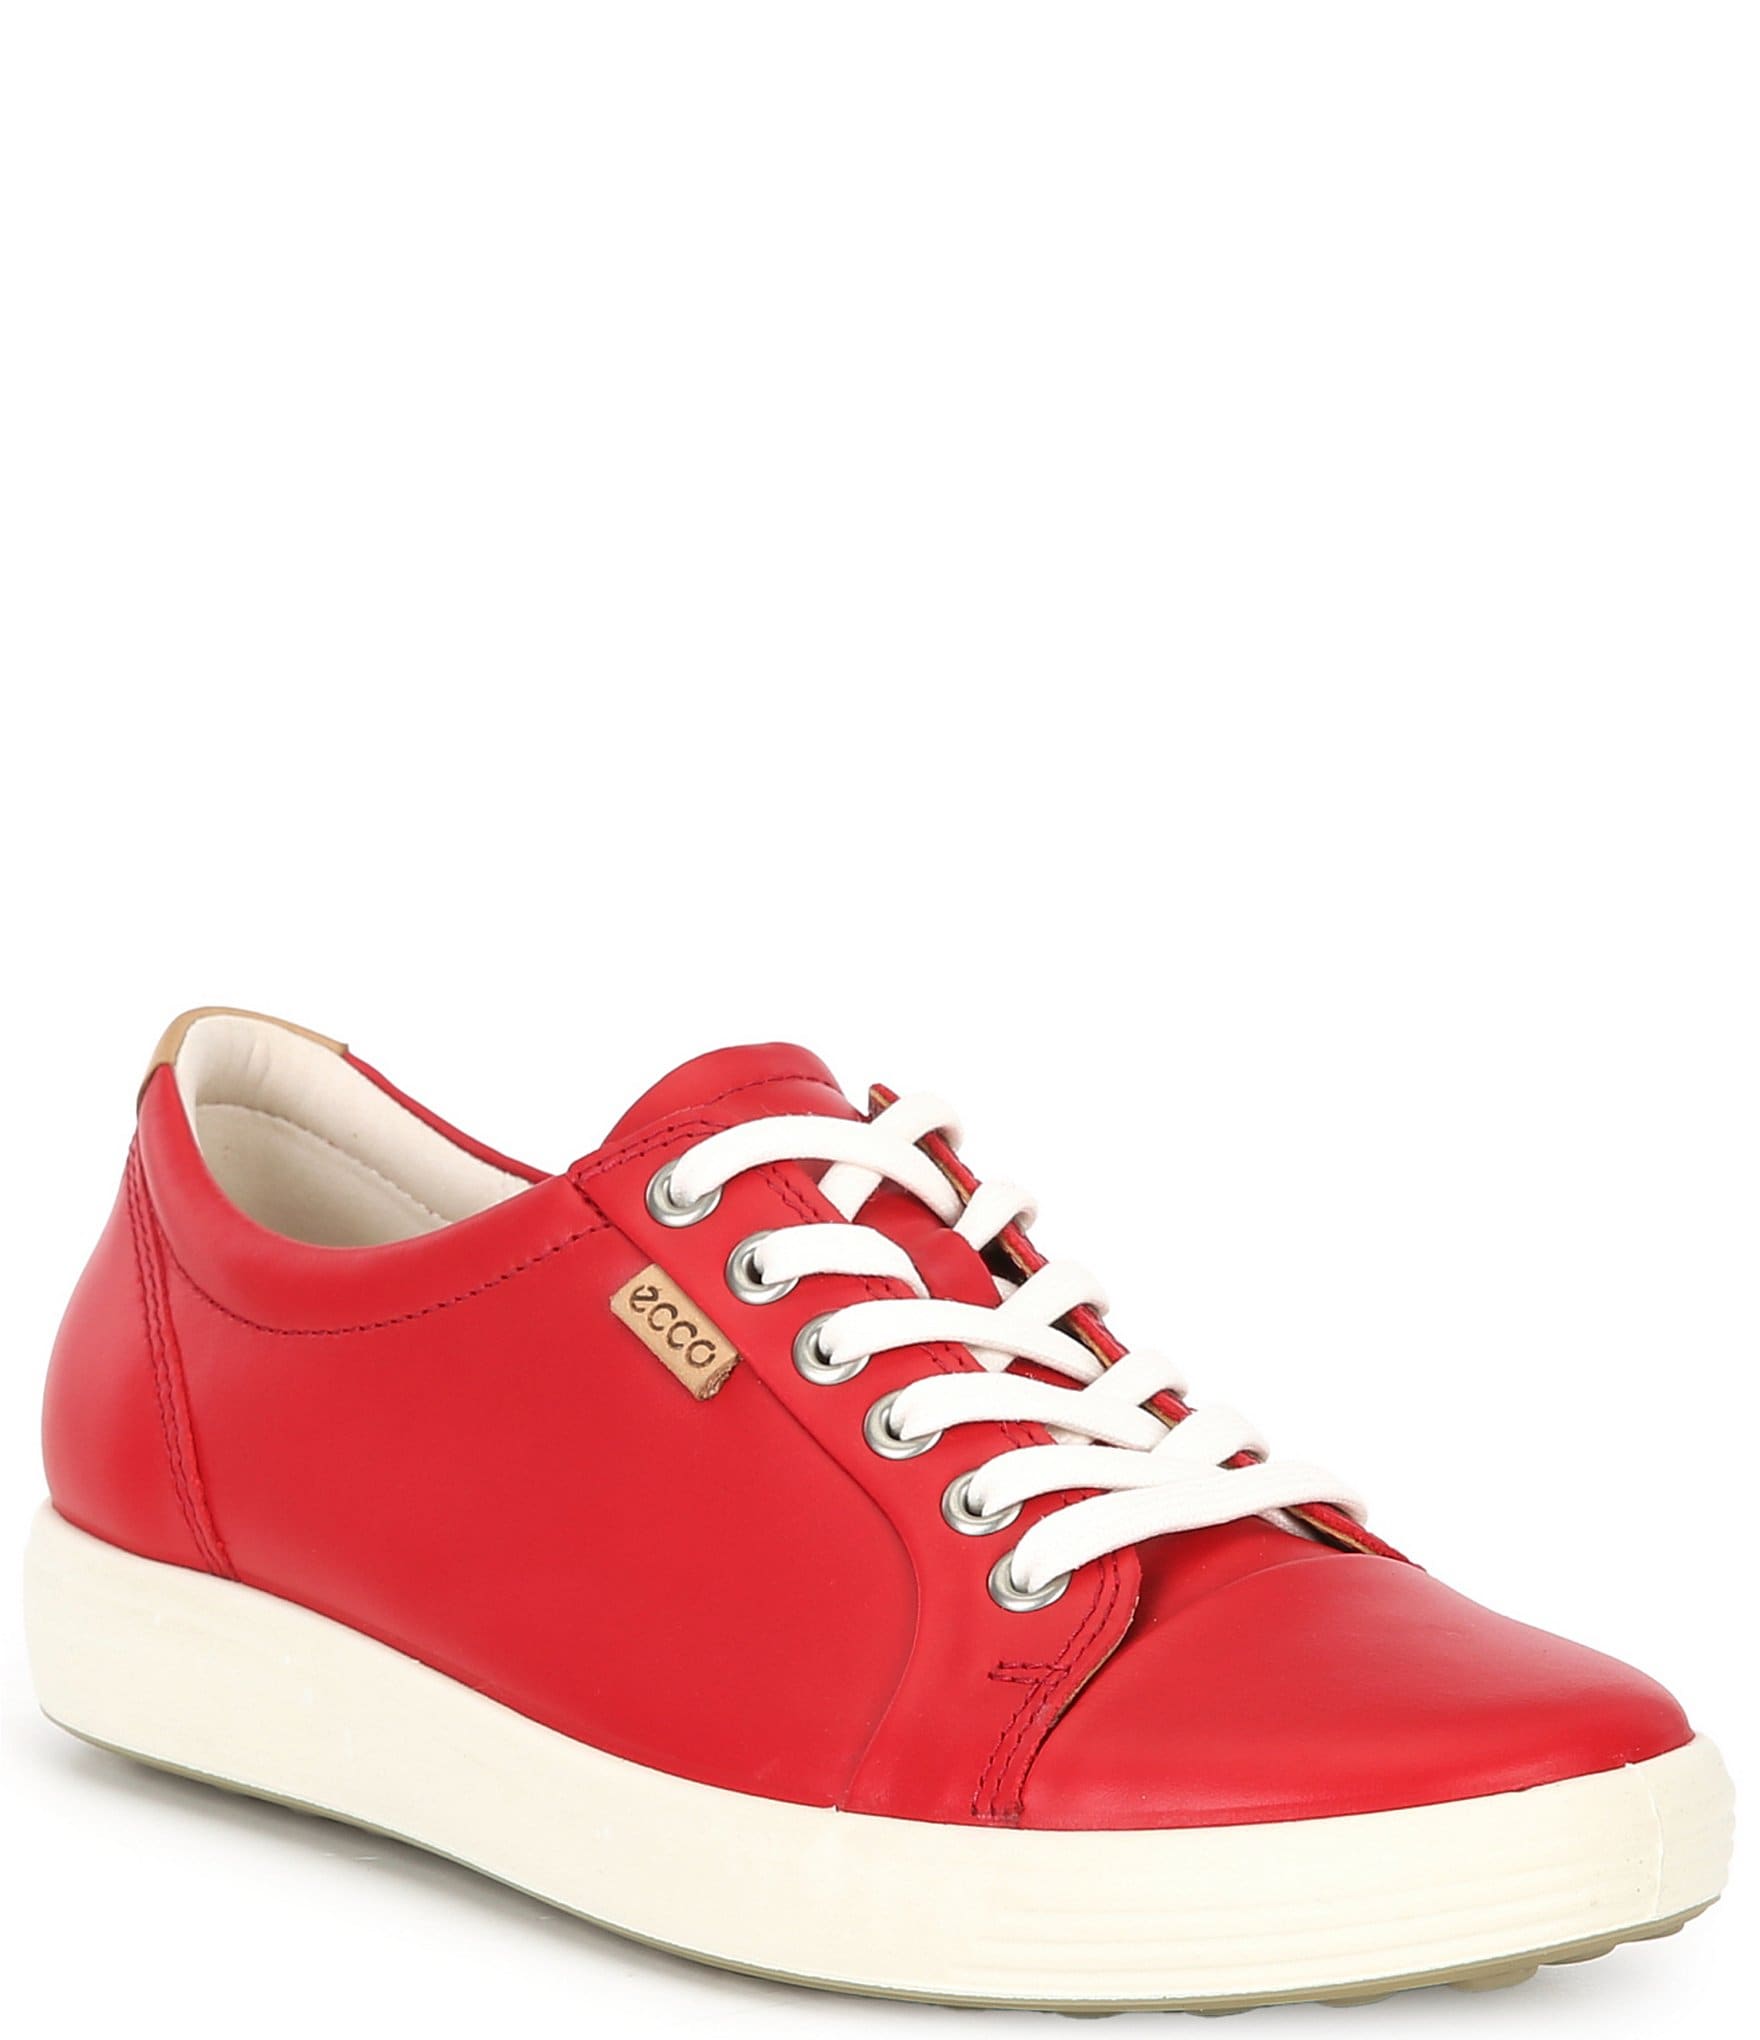 ECCO Women's Soft VII Leather Lace-Up Sneakers